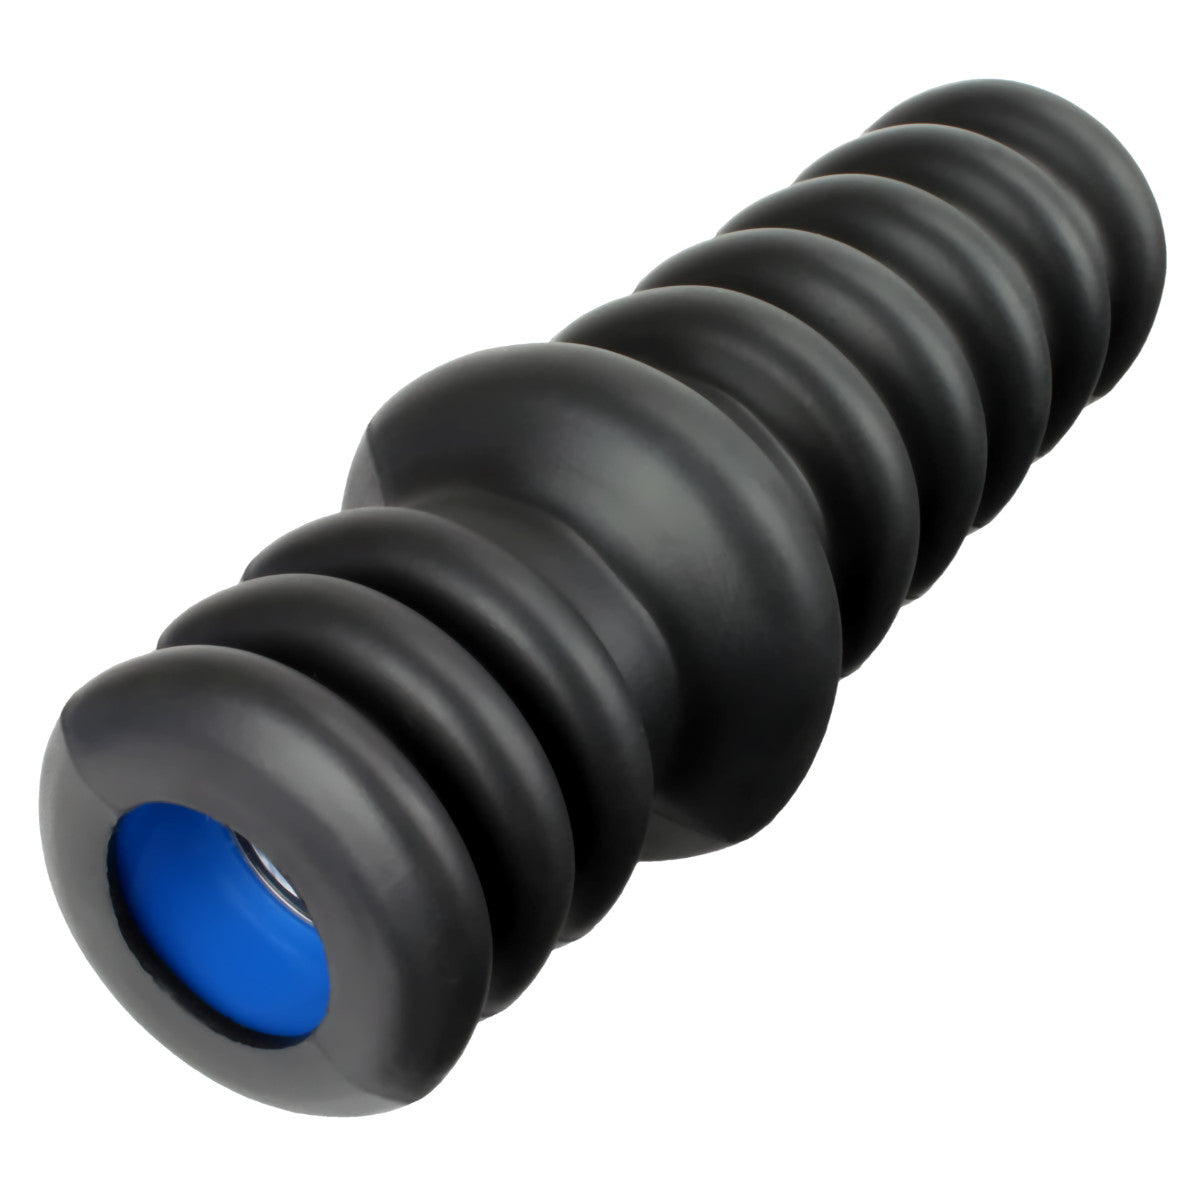 LoosenUP ribbed firm-density foam roller for use with DoubleUP frame